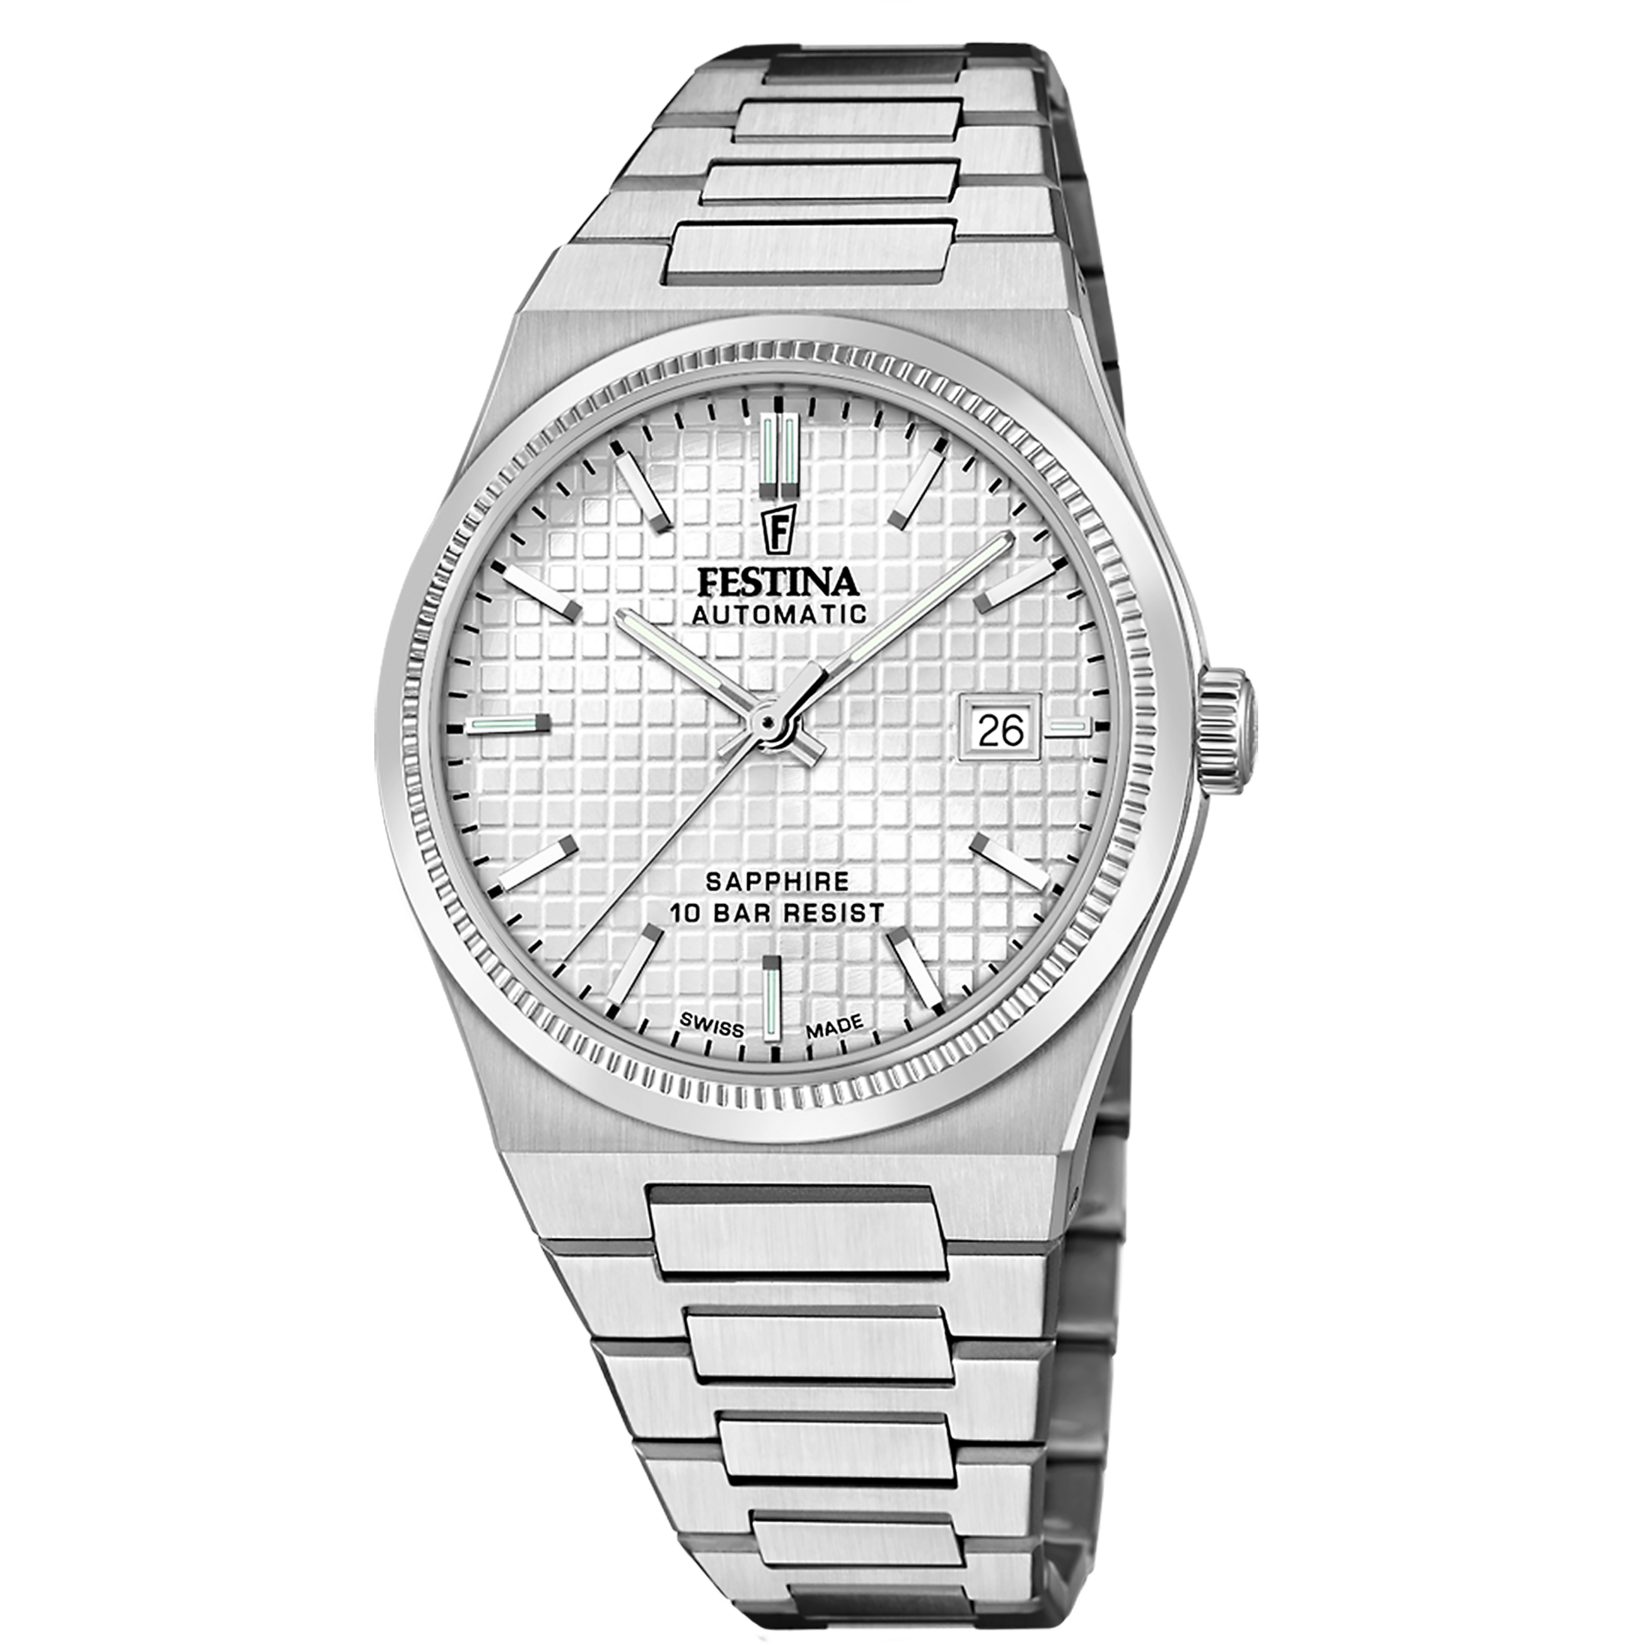 Festina Swiss Made F20028-1 - Analog - Strap Material Stainless Steel I Festina Watches USA